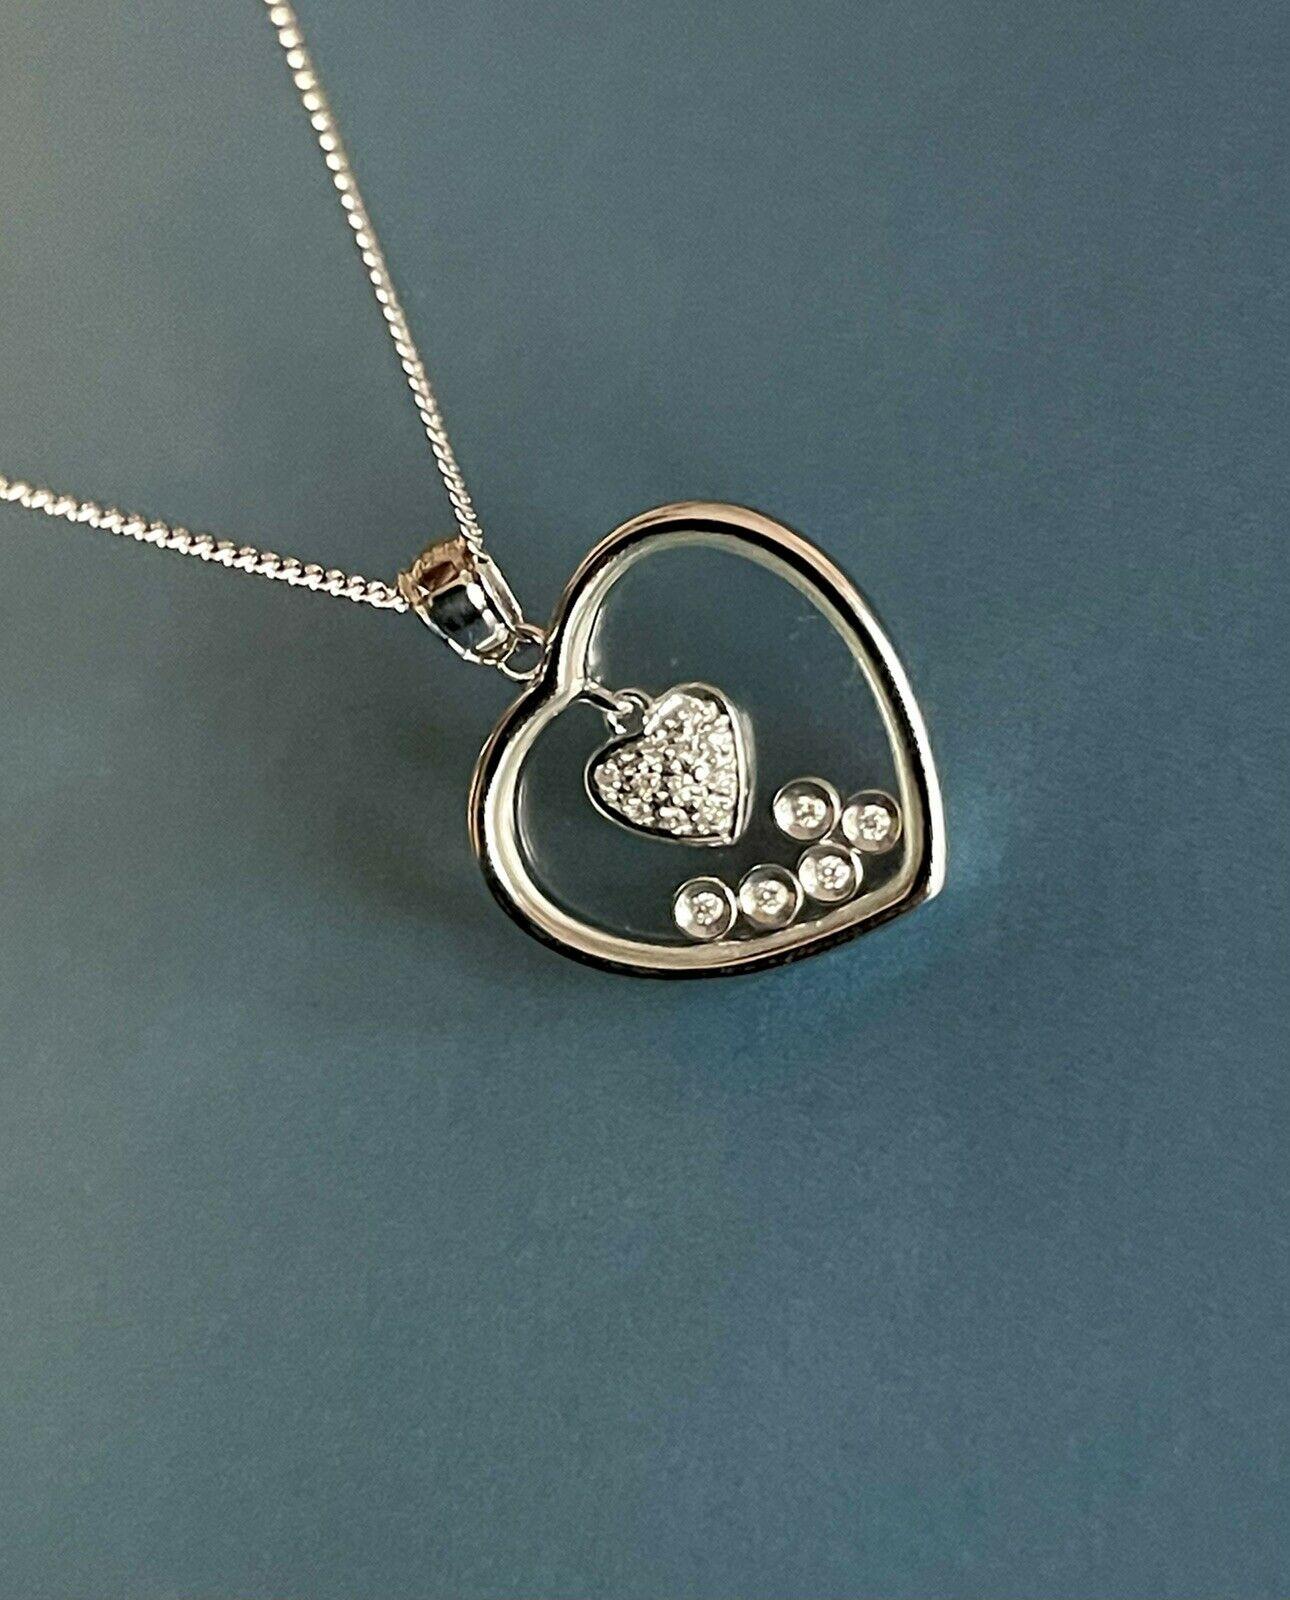 9ct White Gold Dancing Diamond Necklace 0.22ct Floating Diamond Heart Pendant Ch For Sale 1